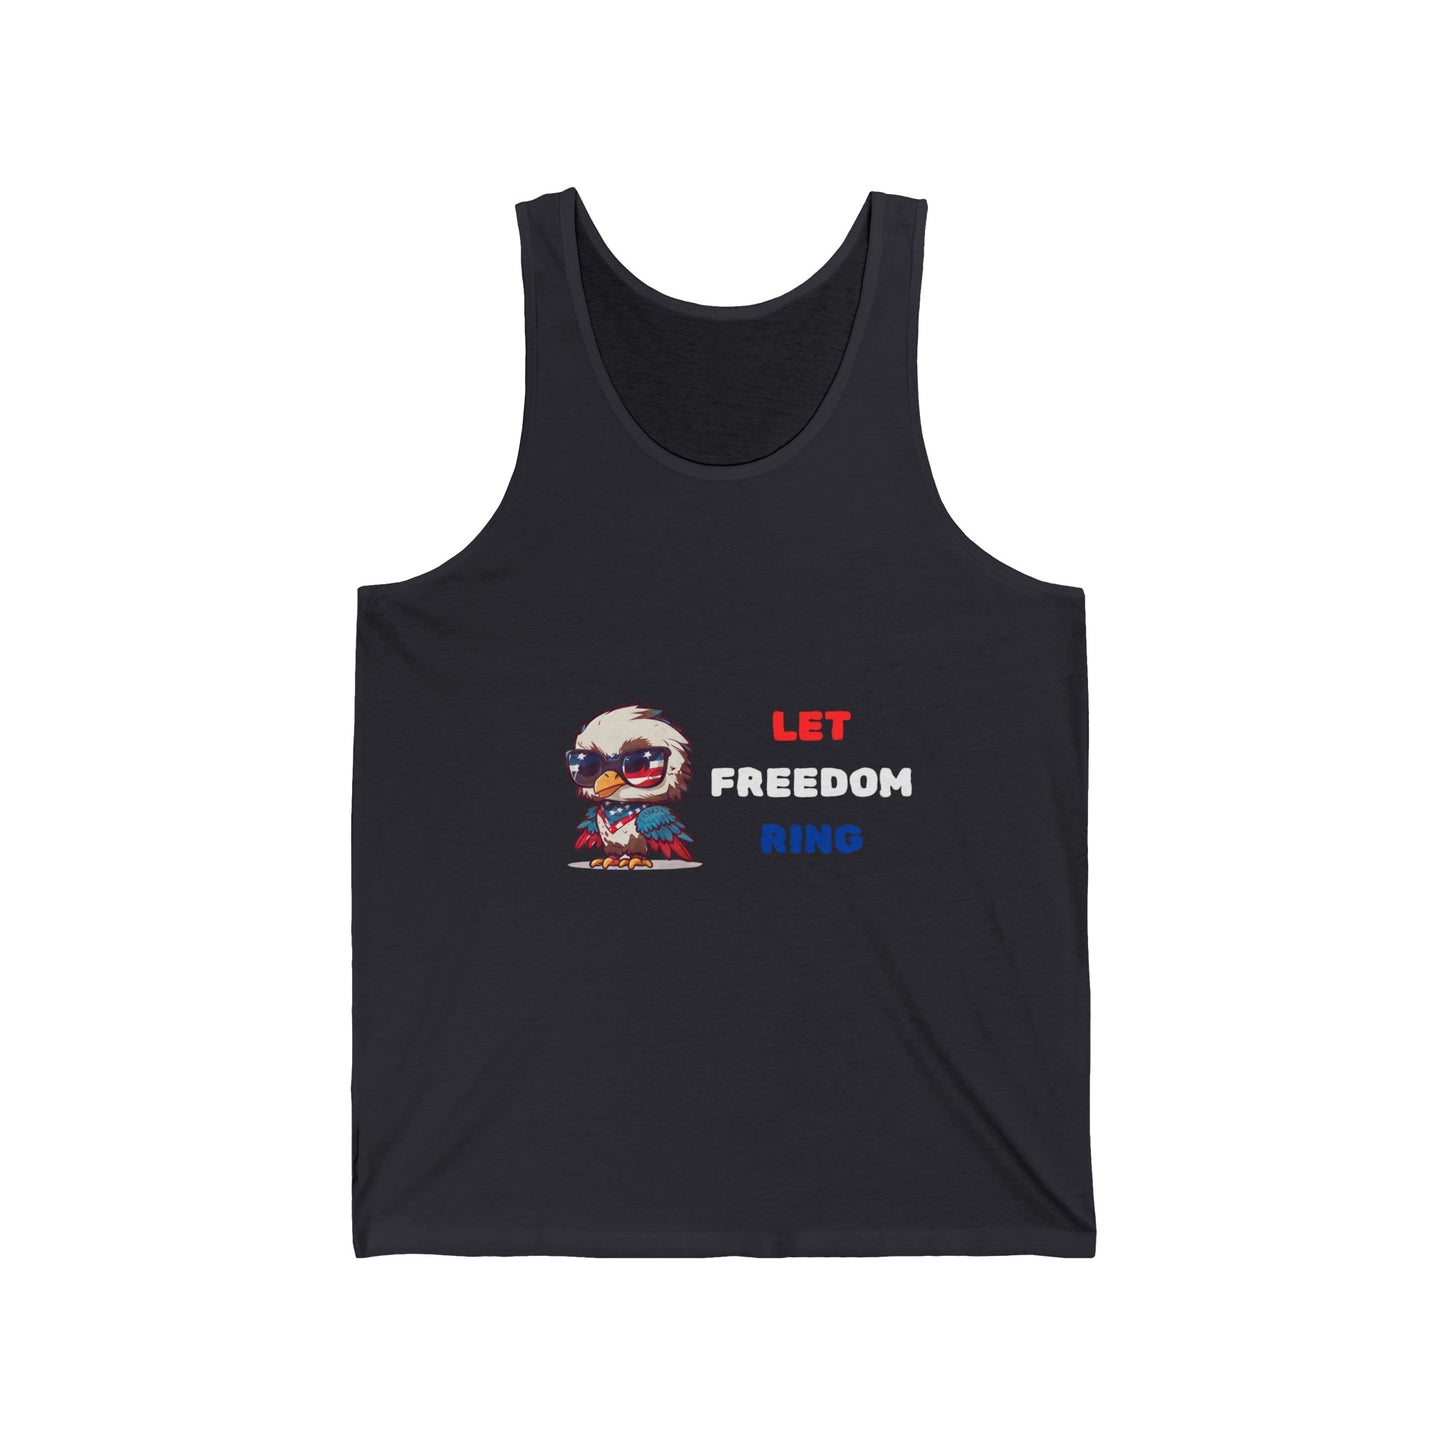 Let Freedom Ring Unisex Jersey Tank